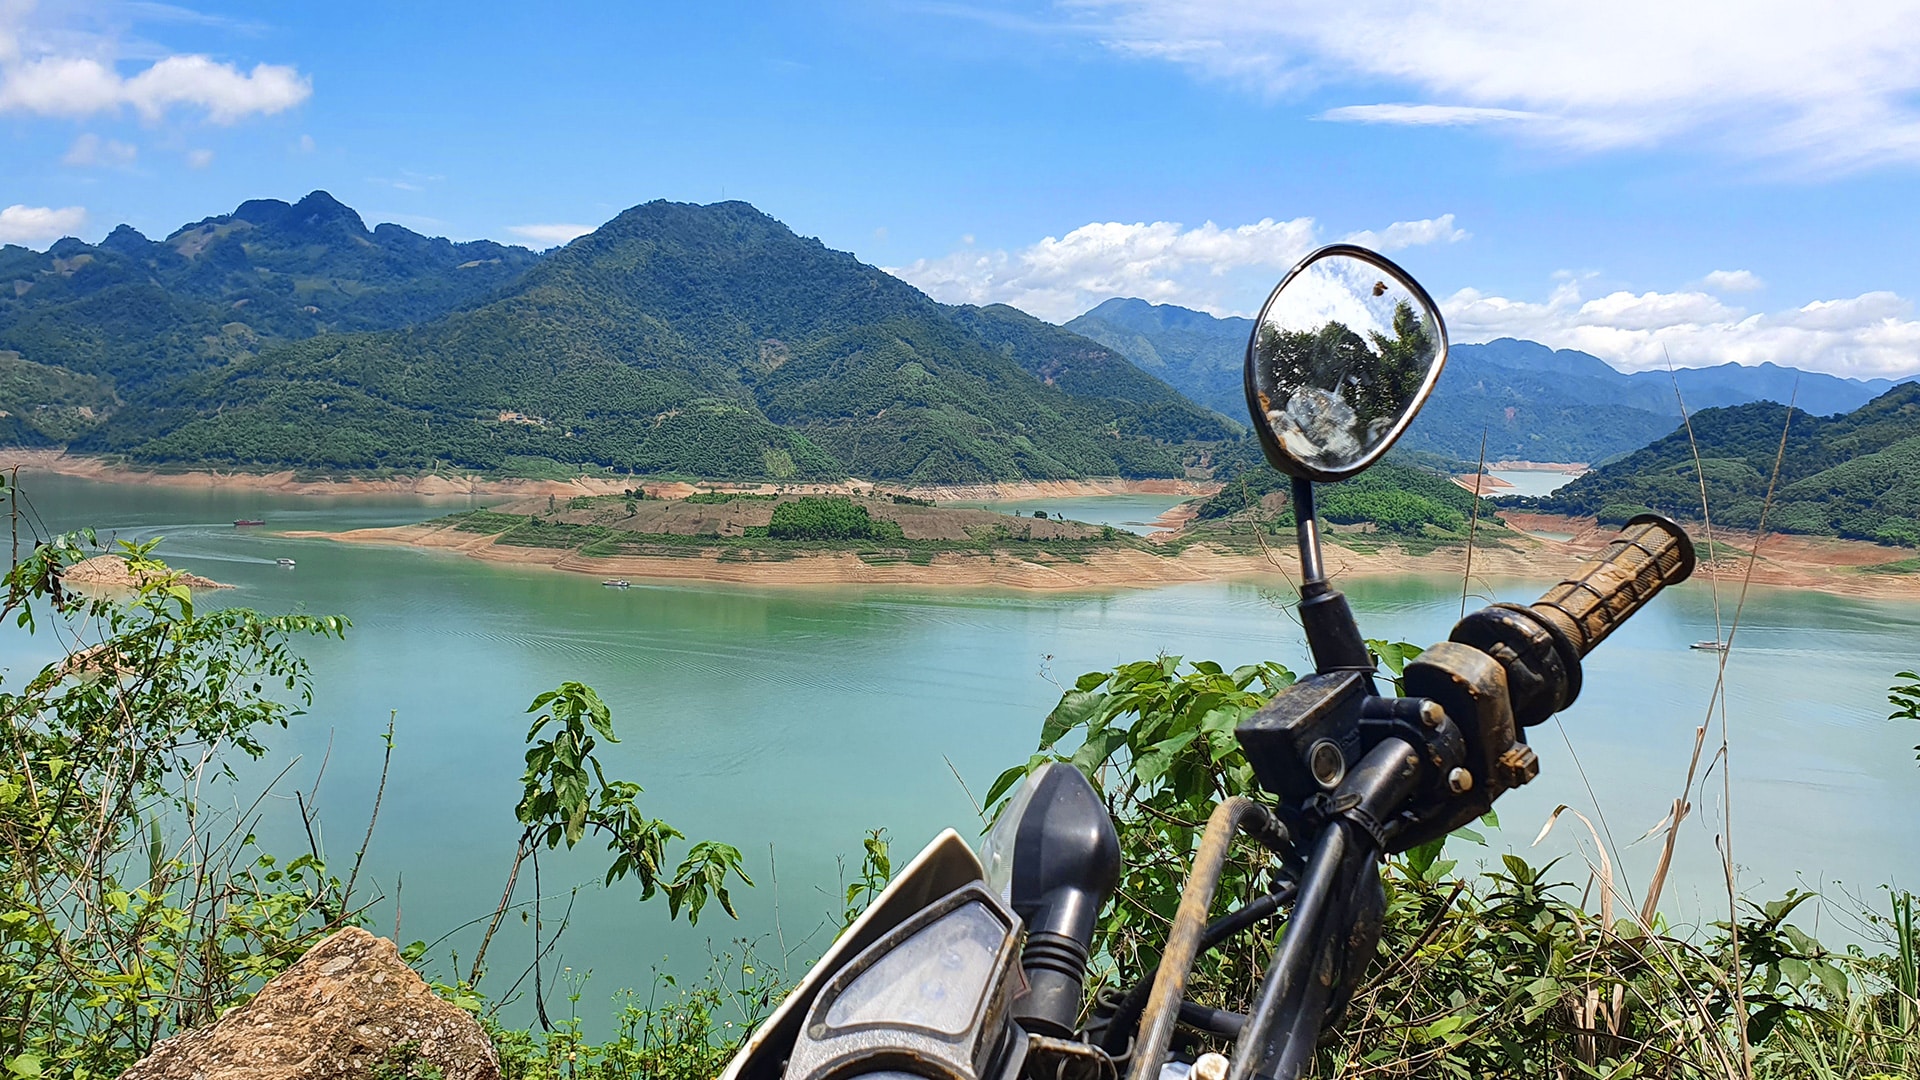 XR parked up near the Da River in North Vietnam